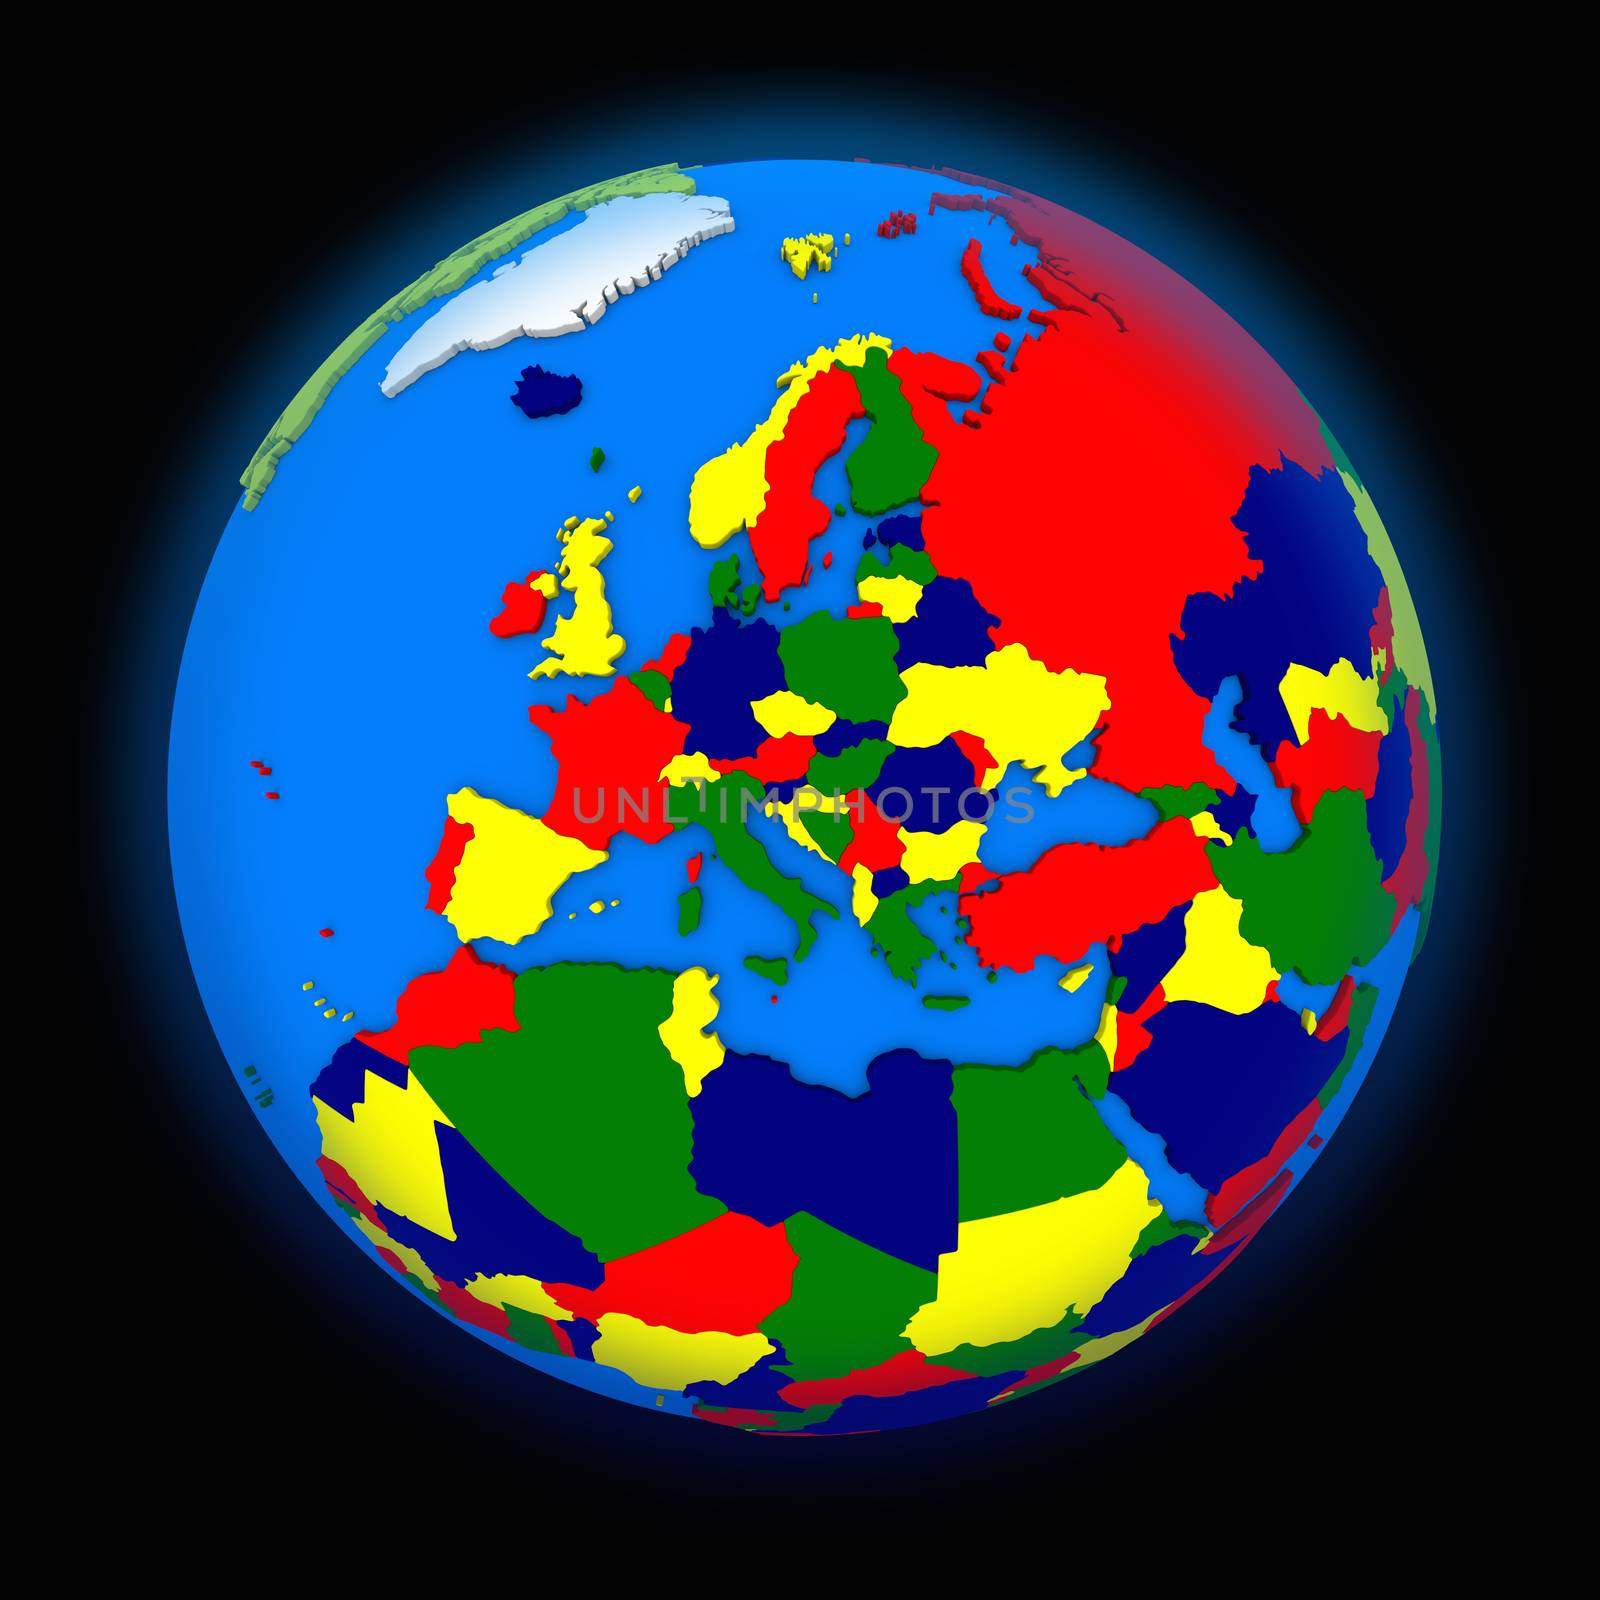 Europe on political Earth by Harvepino